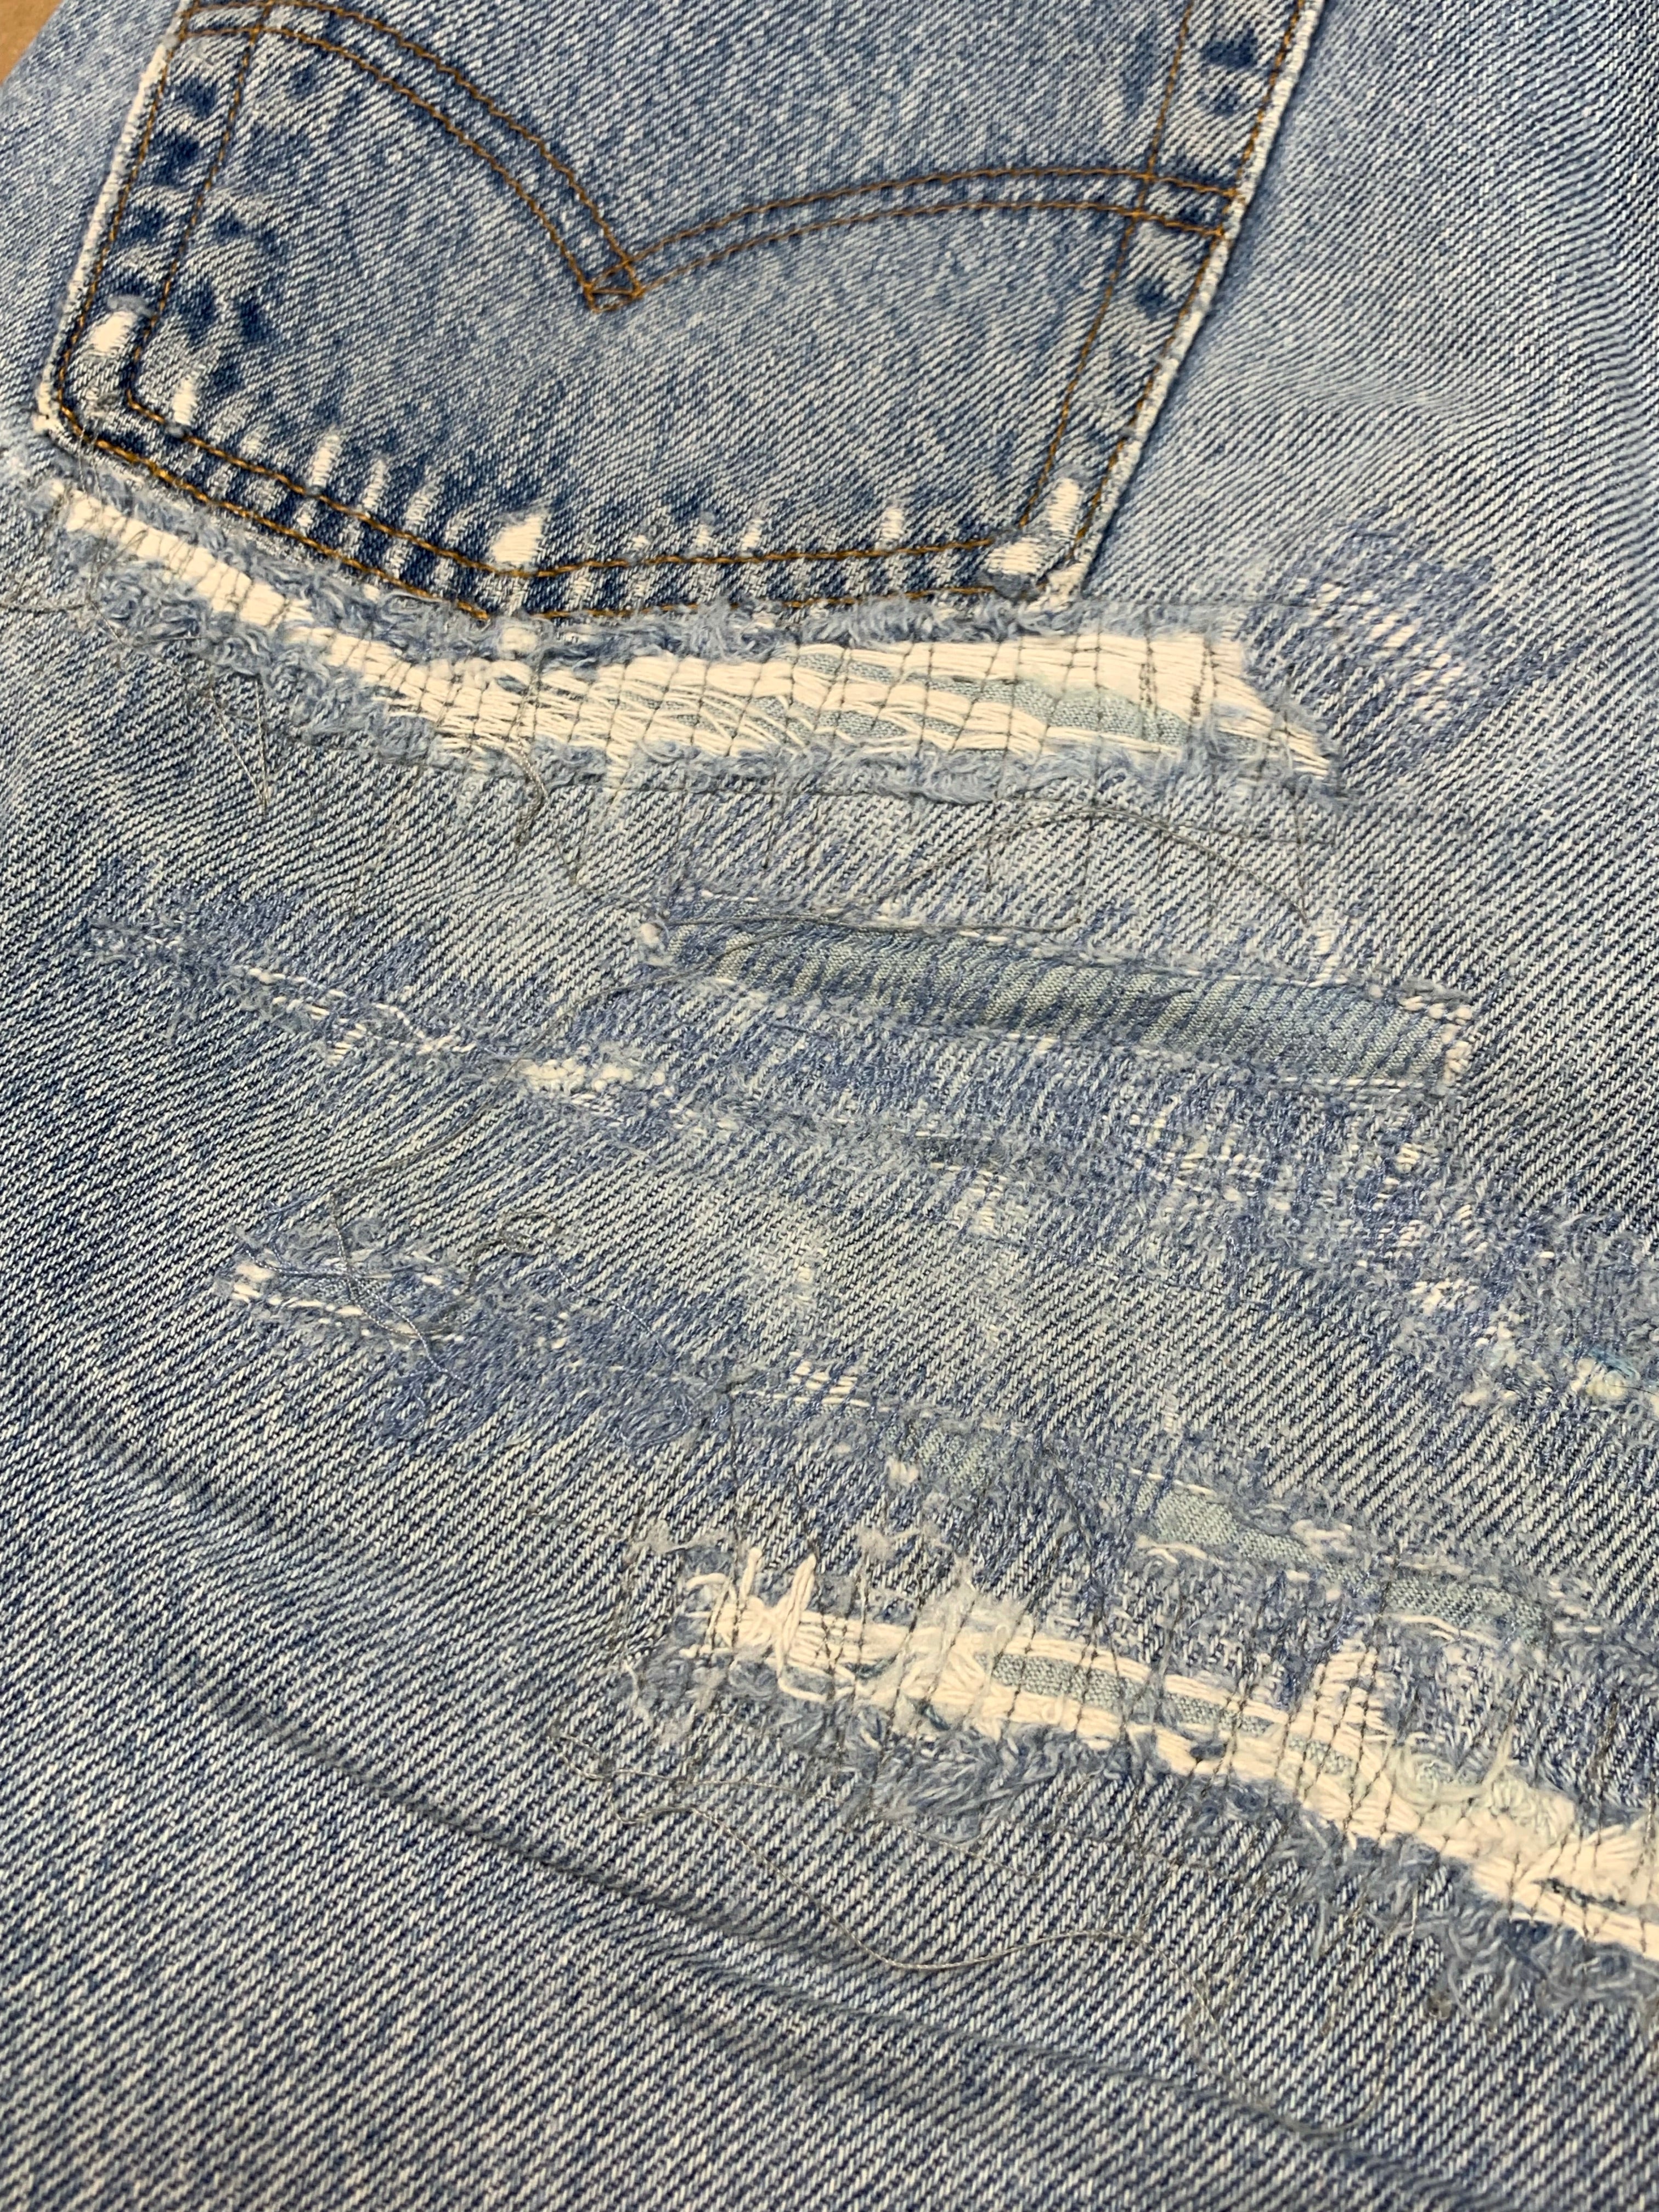 Vintage Levi’s 501 Jeans with Intense Repairs - Light Wash - 30x34